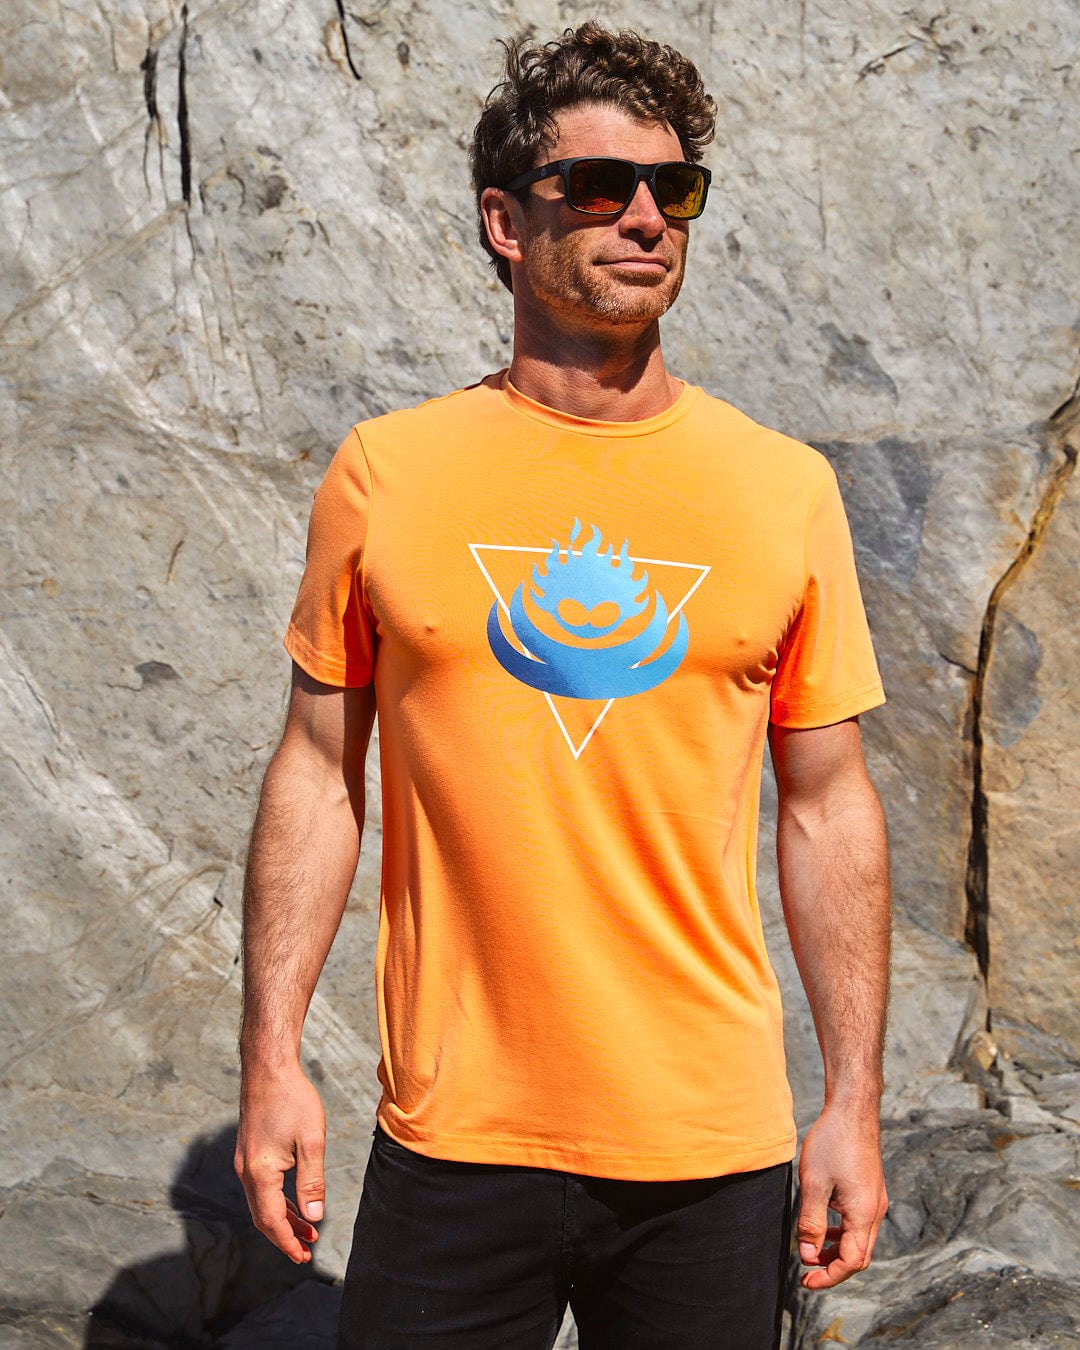 A man wearing sunglasses and a Saltrock Flame Tri - Mens Recycled Short Sleeve T-Shirt - Light Orange.